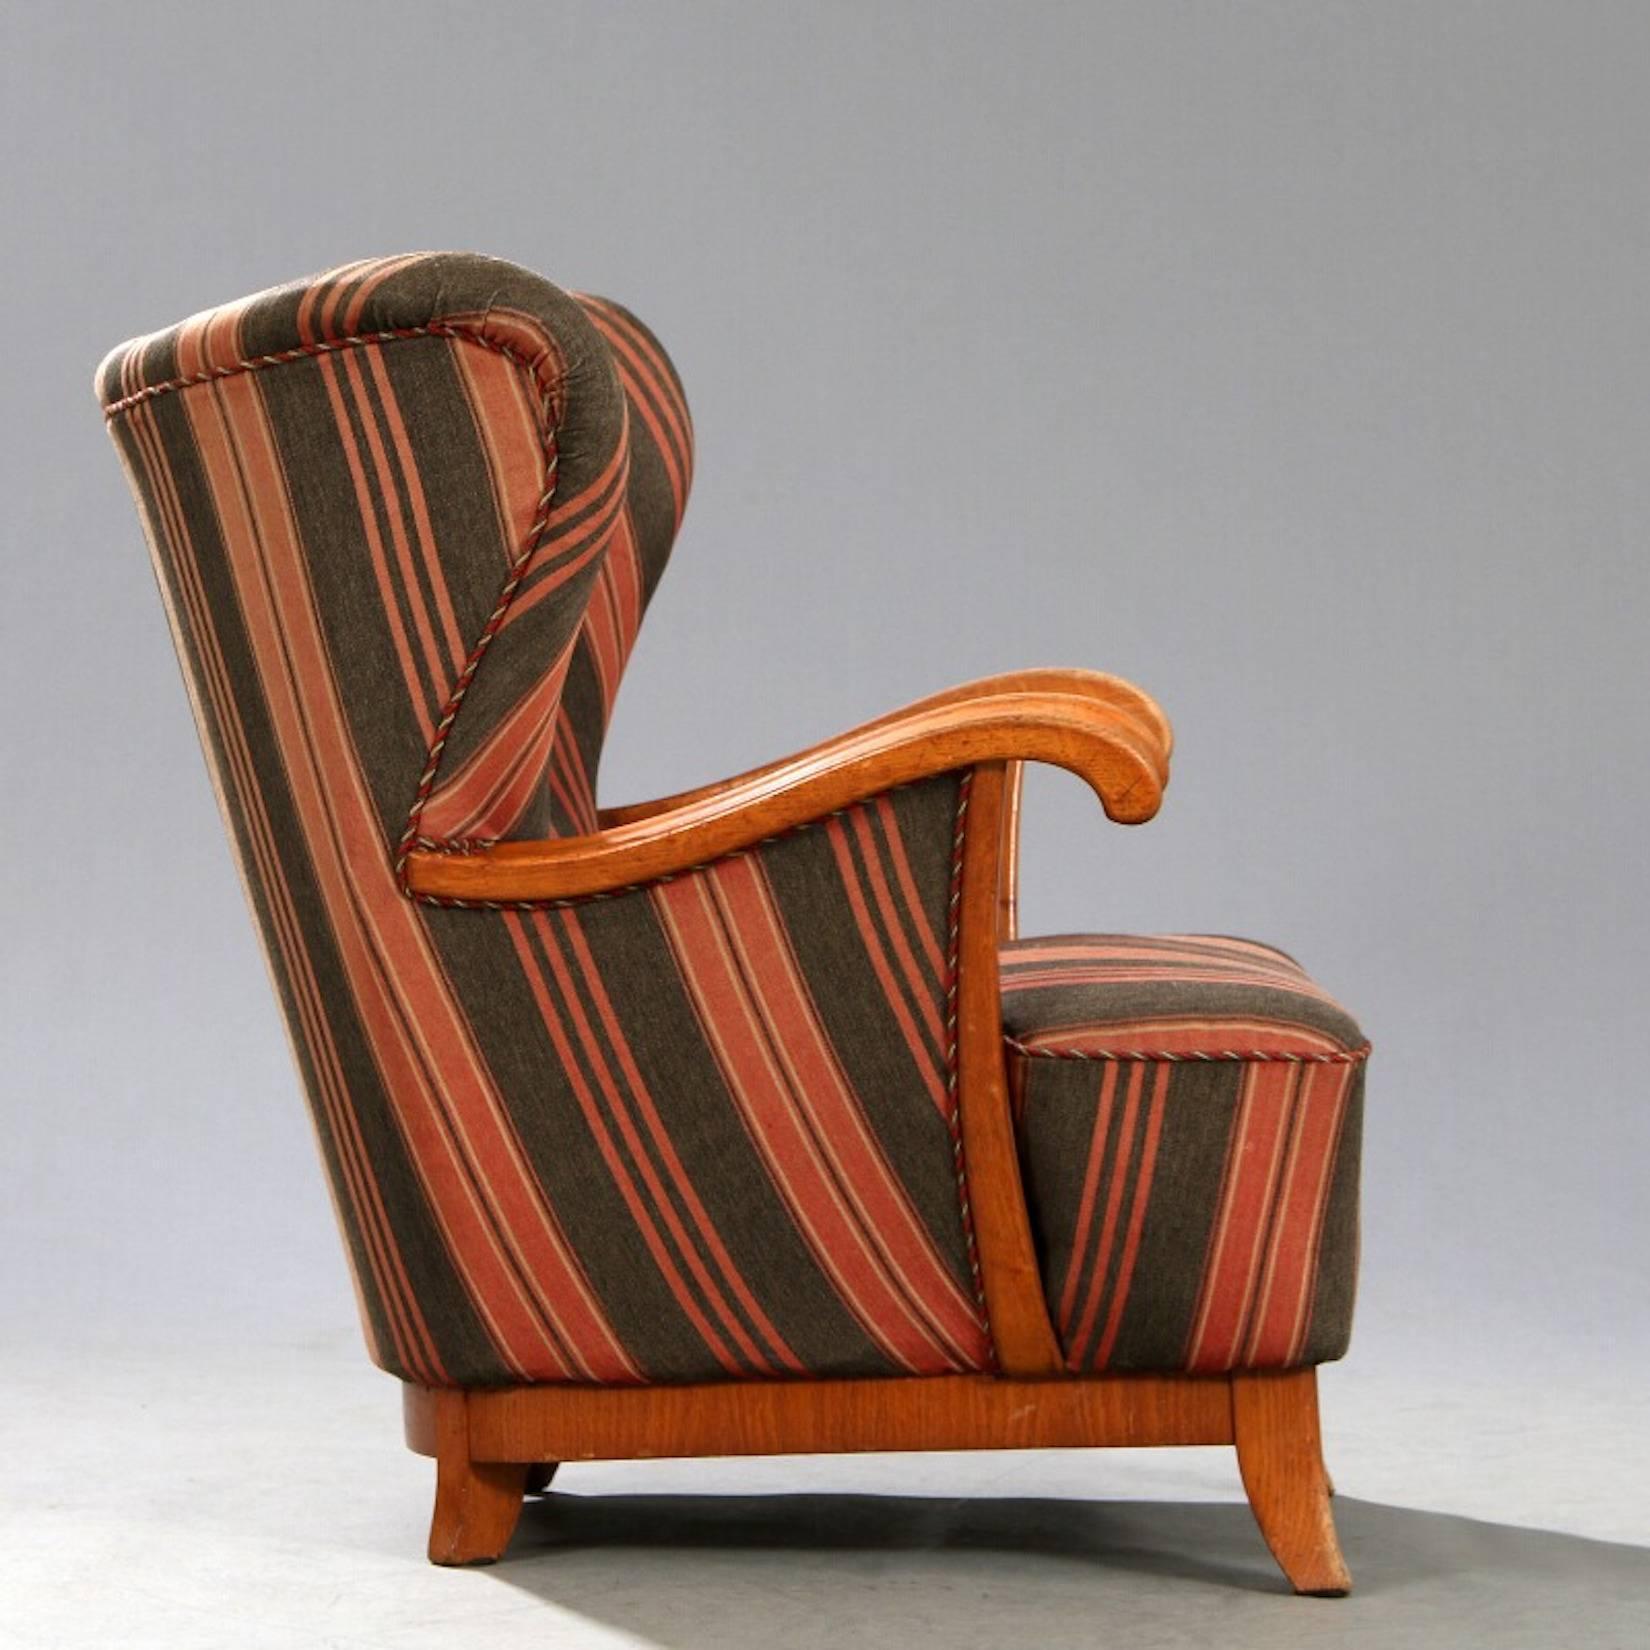 Danish modern cabinet-maker lounge chair, sturdy and comfortable, with oak frame and original striped fabric.